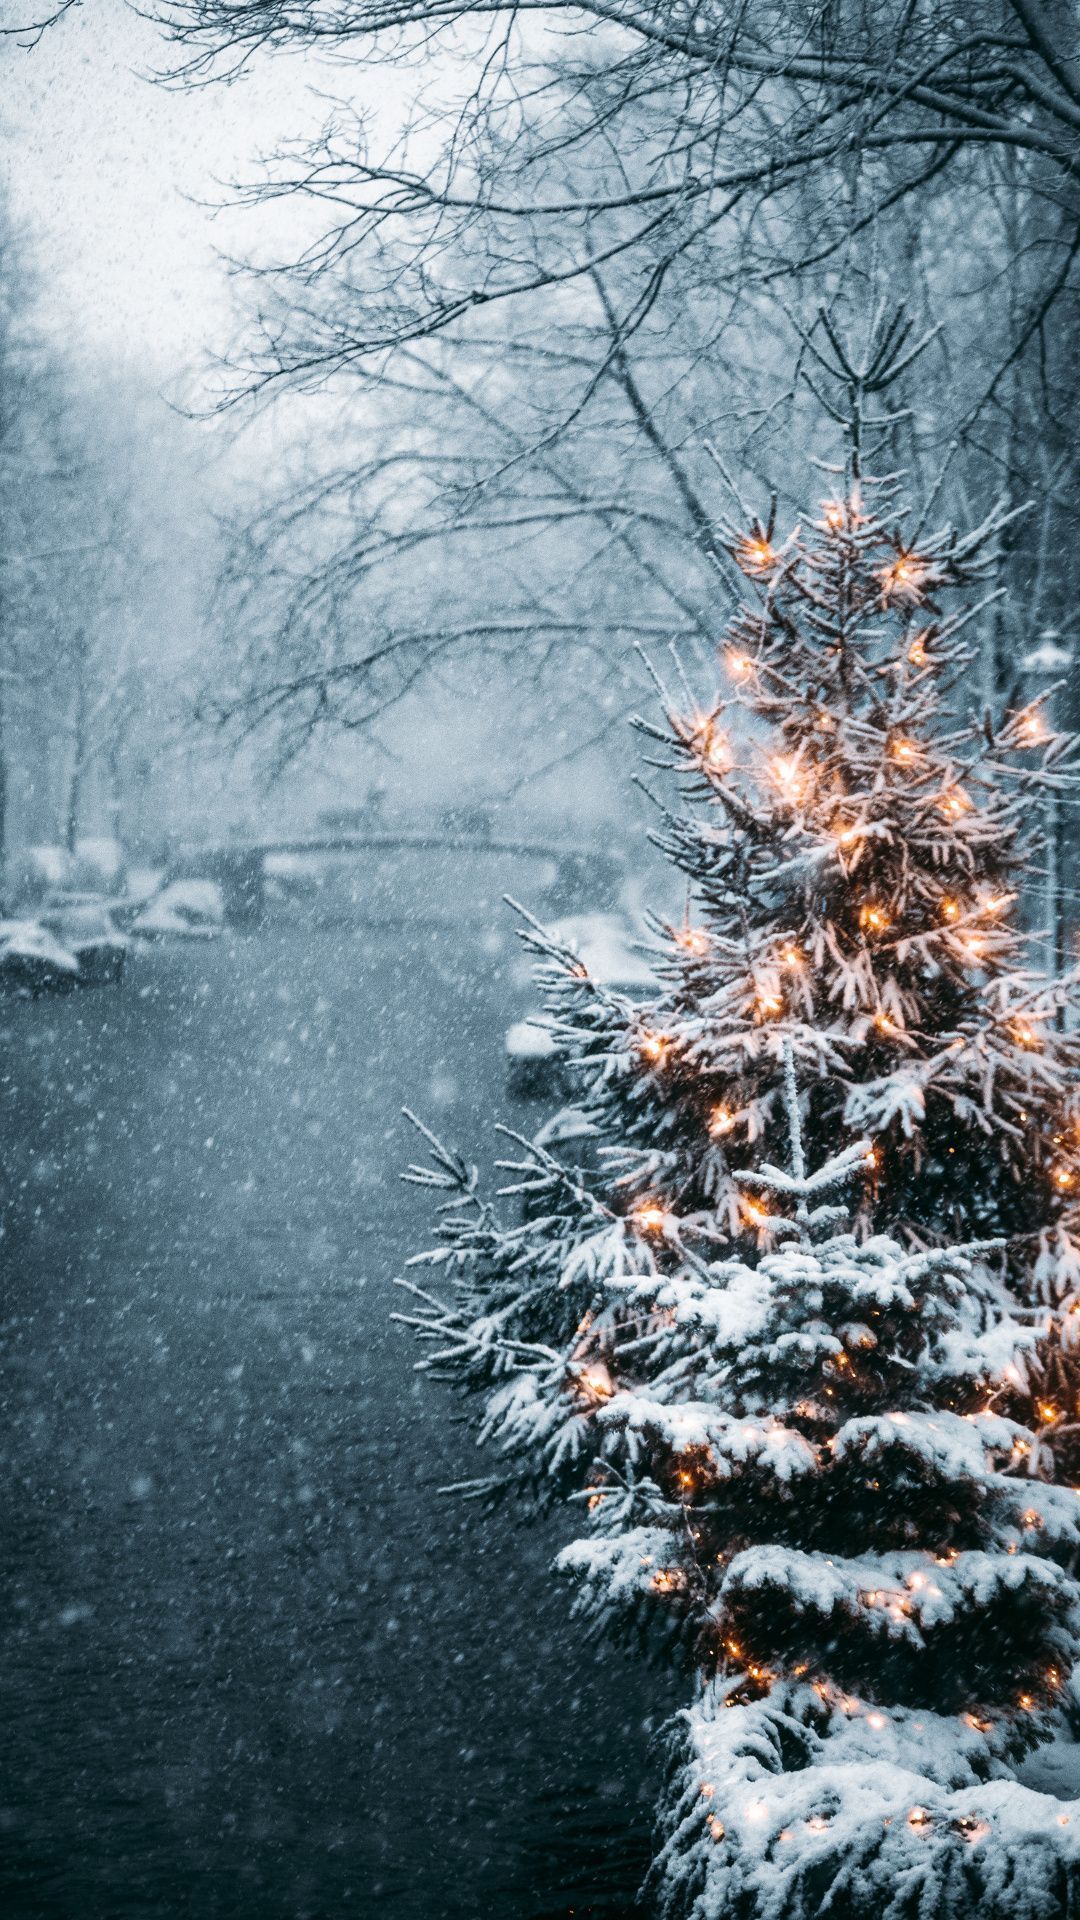 A snowy Christmas tree in the snow. - Winter, snow